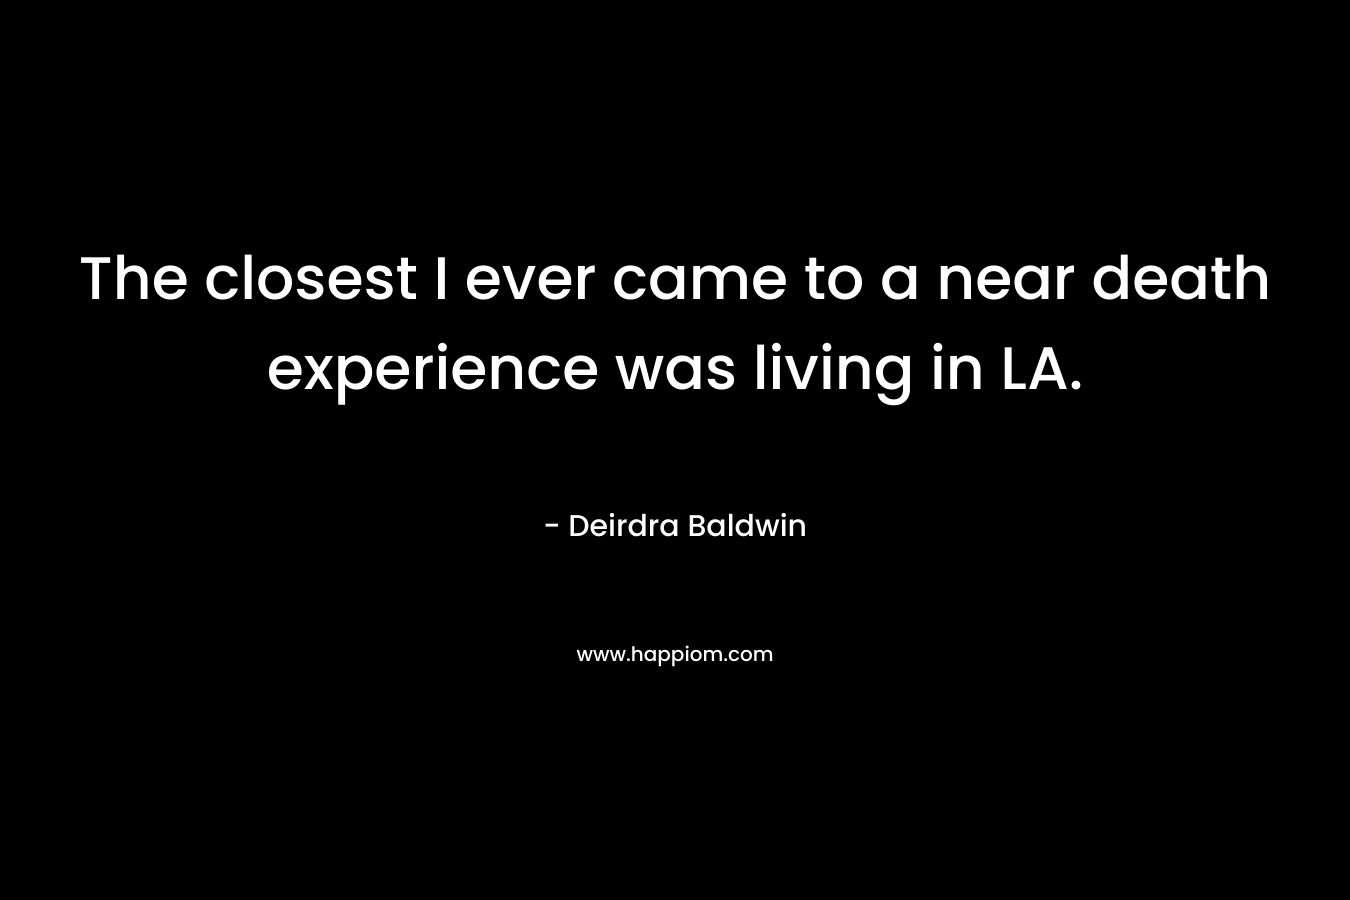 The closest I ever came to a near death experience was living in LA. – Deirdra Baldwin